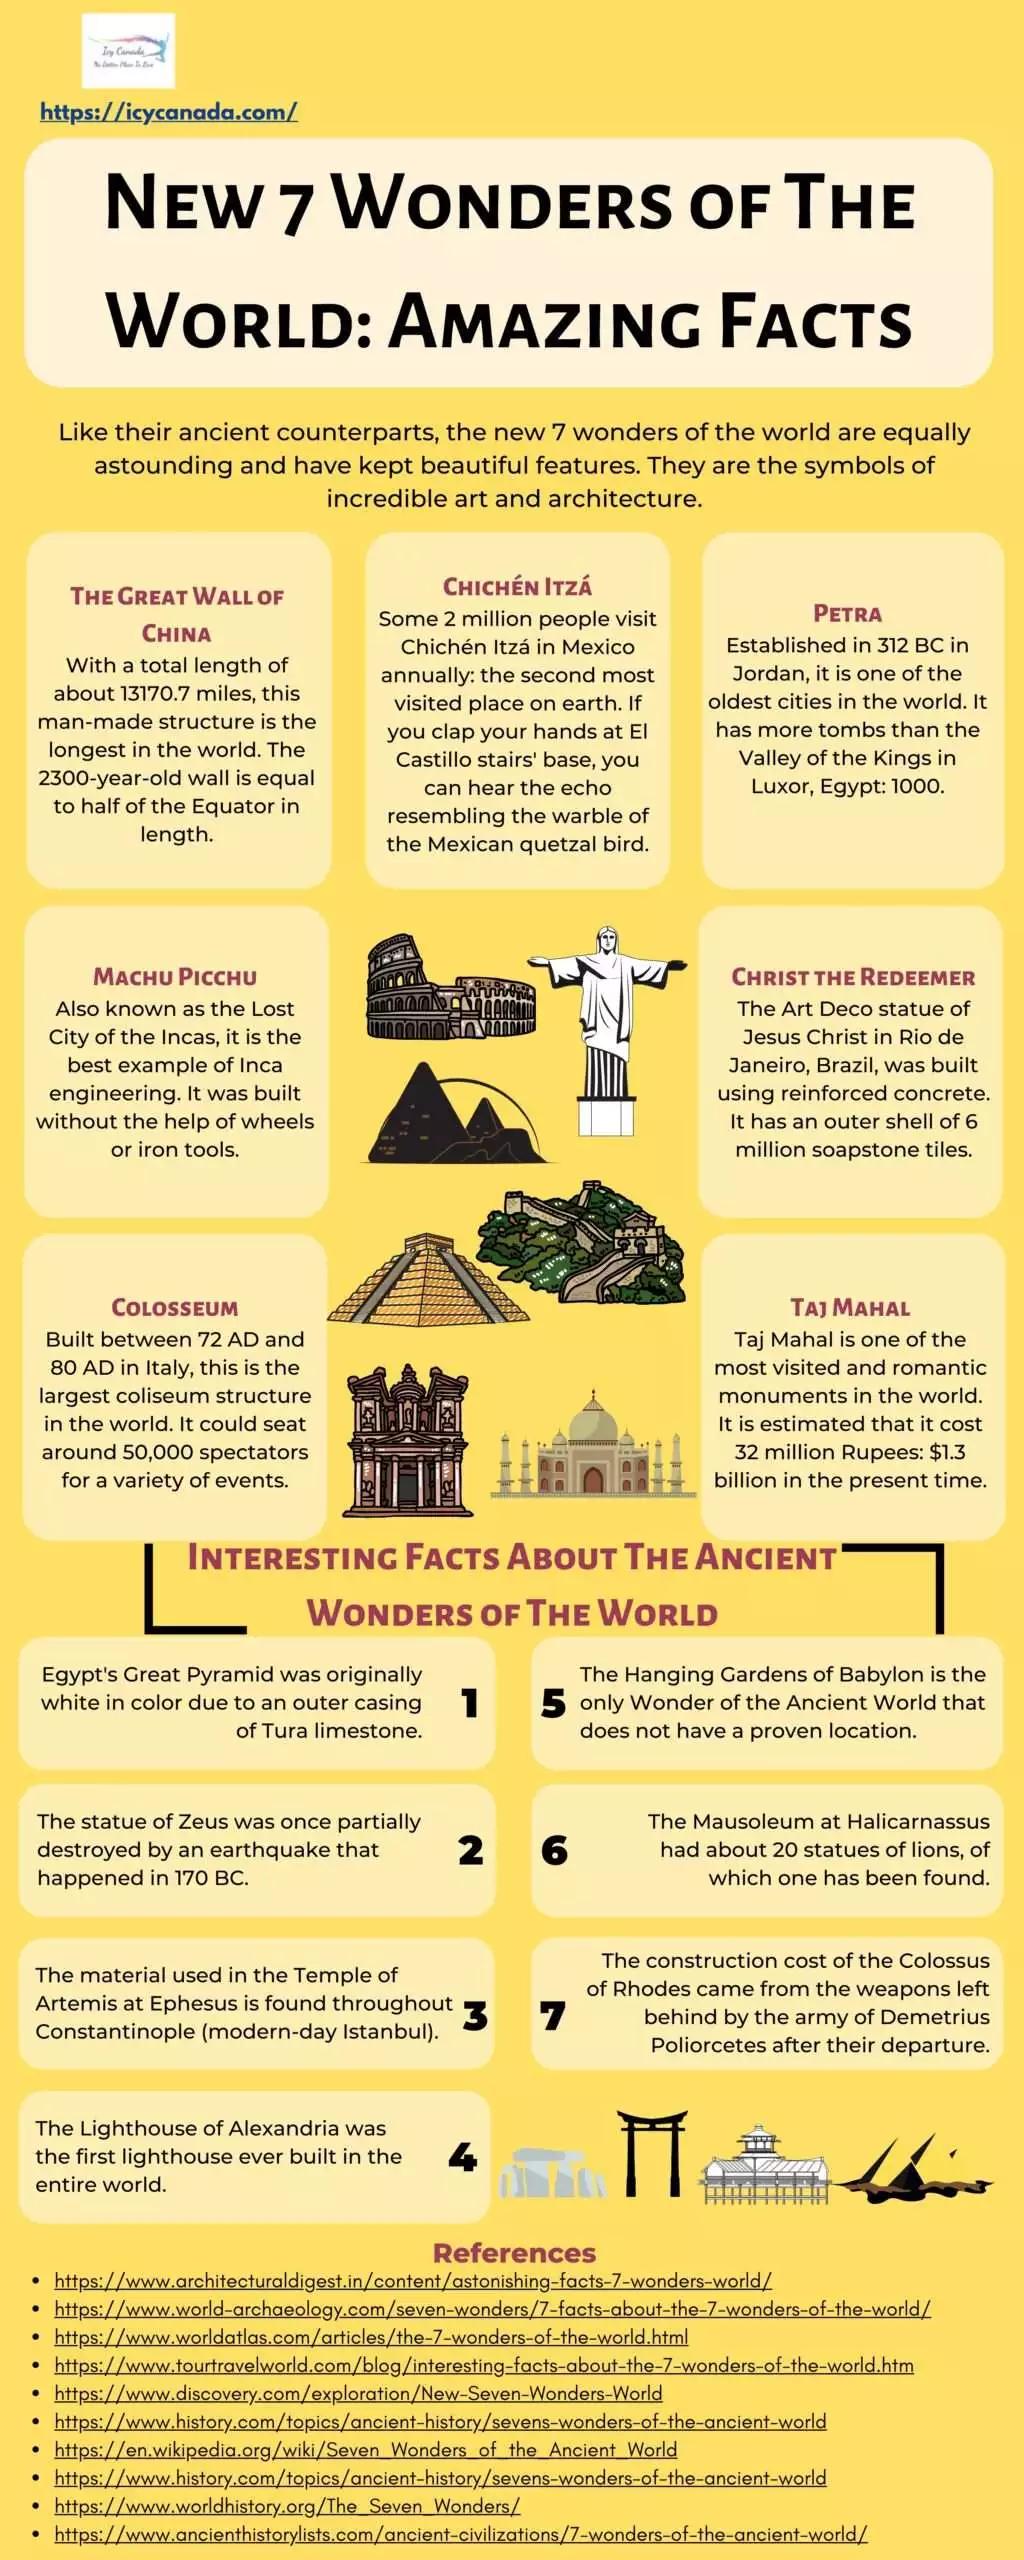 New 7 Wonders of The World Amazing Facts